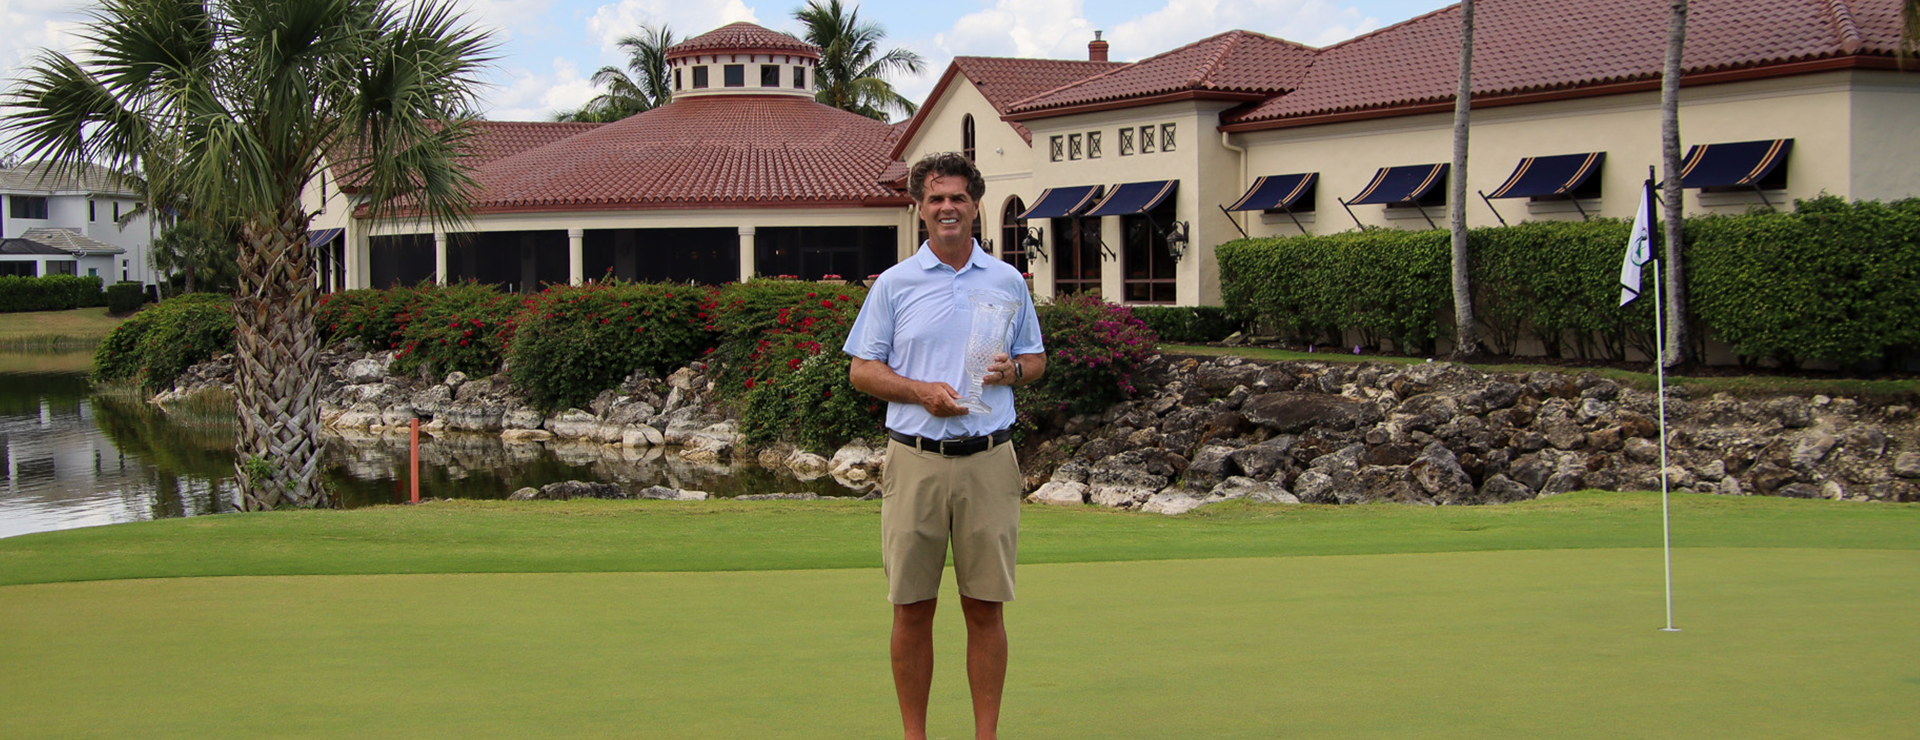 Schuster Soars to Victory at Florida Senior Open